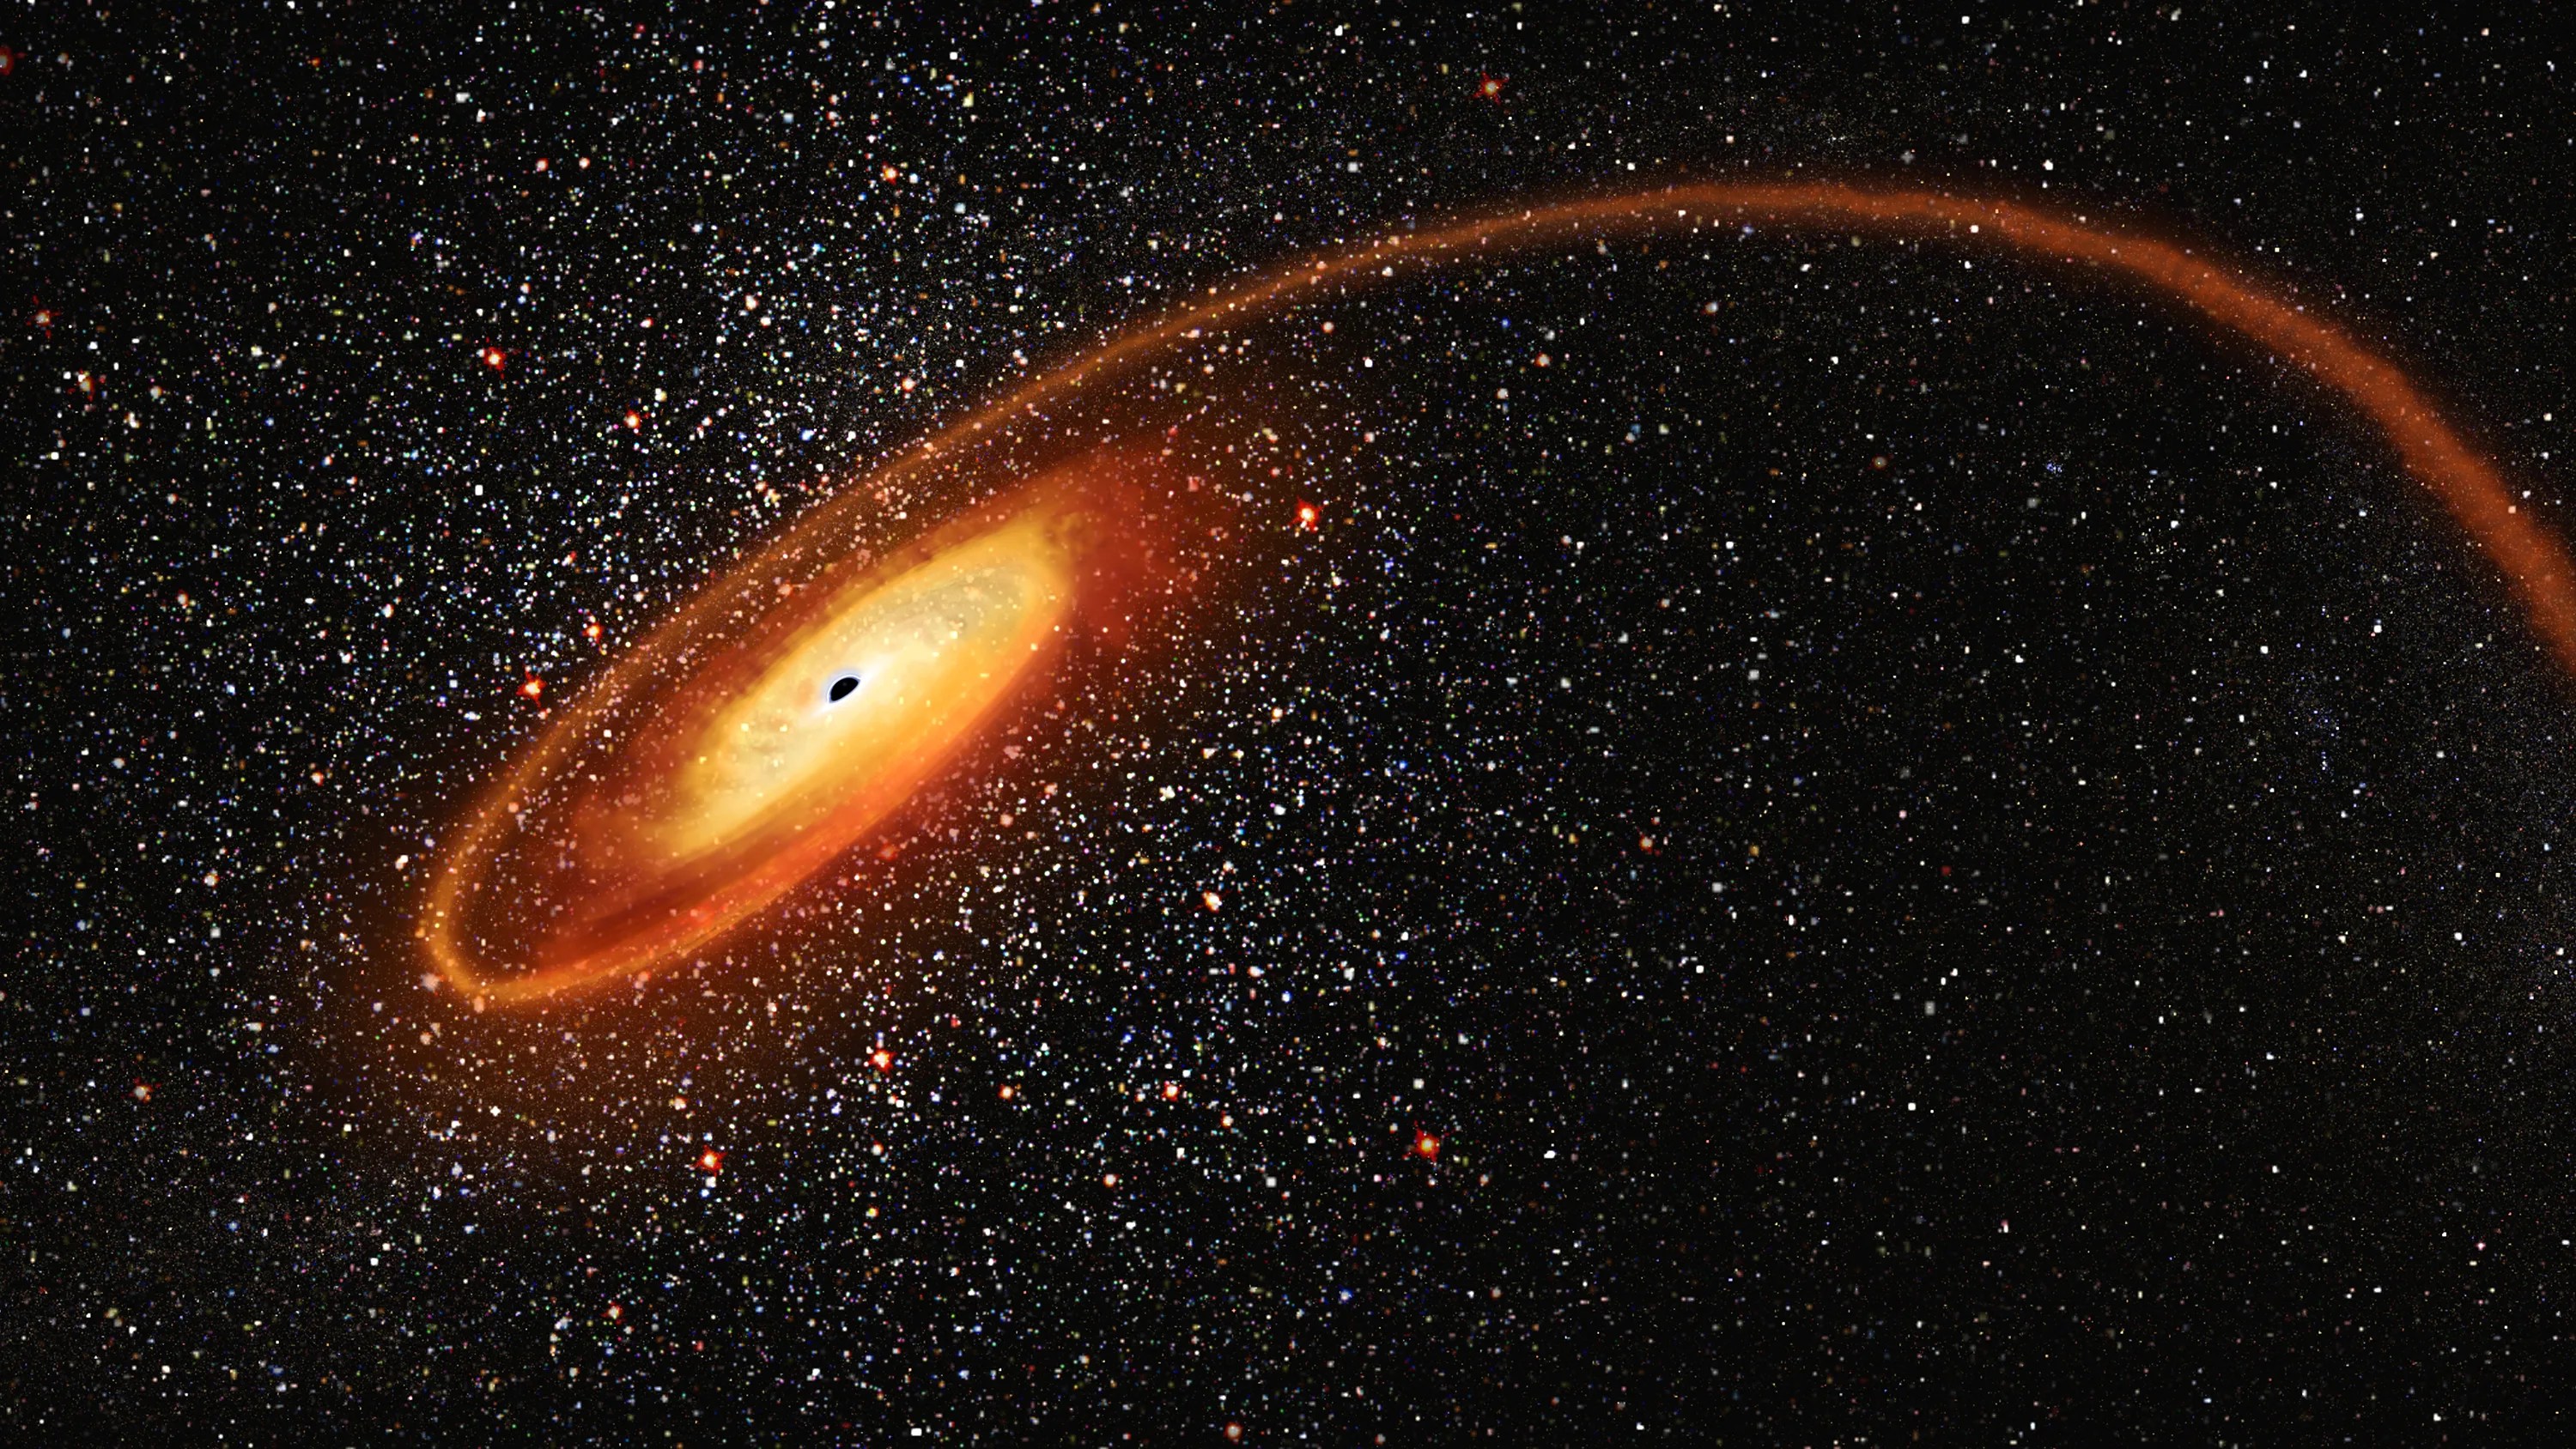 Illustration of a glowing black hole accretion disk with material spiraling into it.